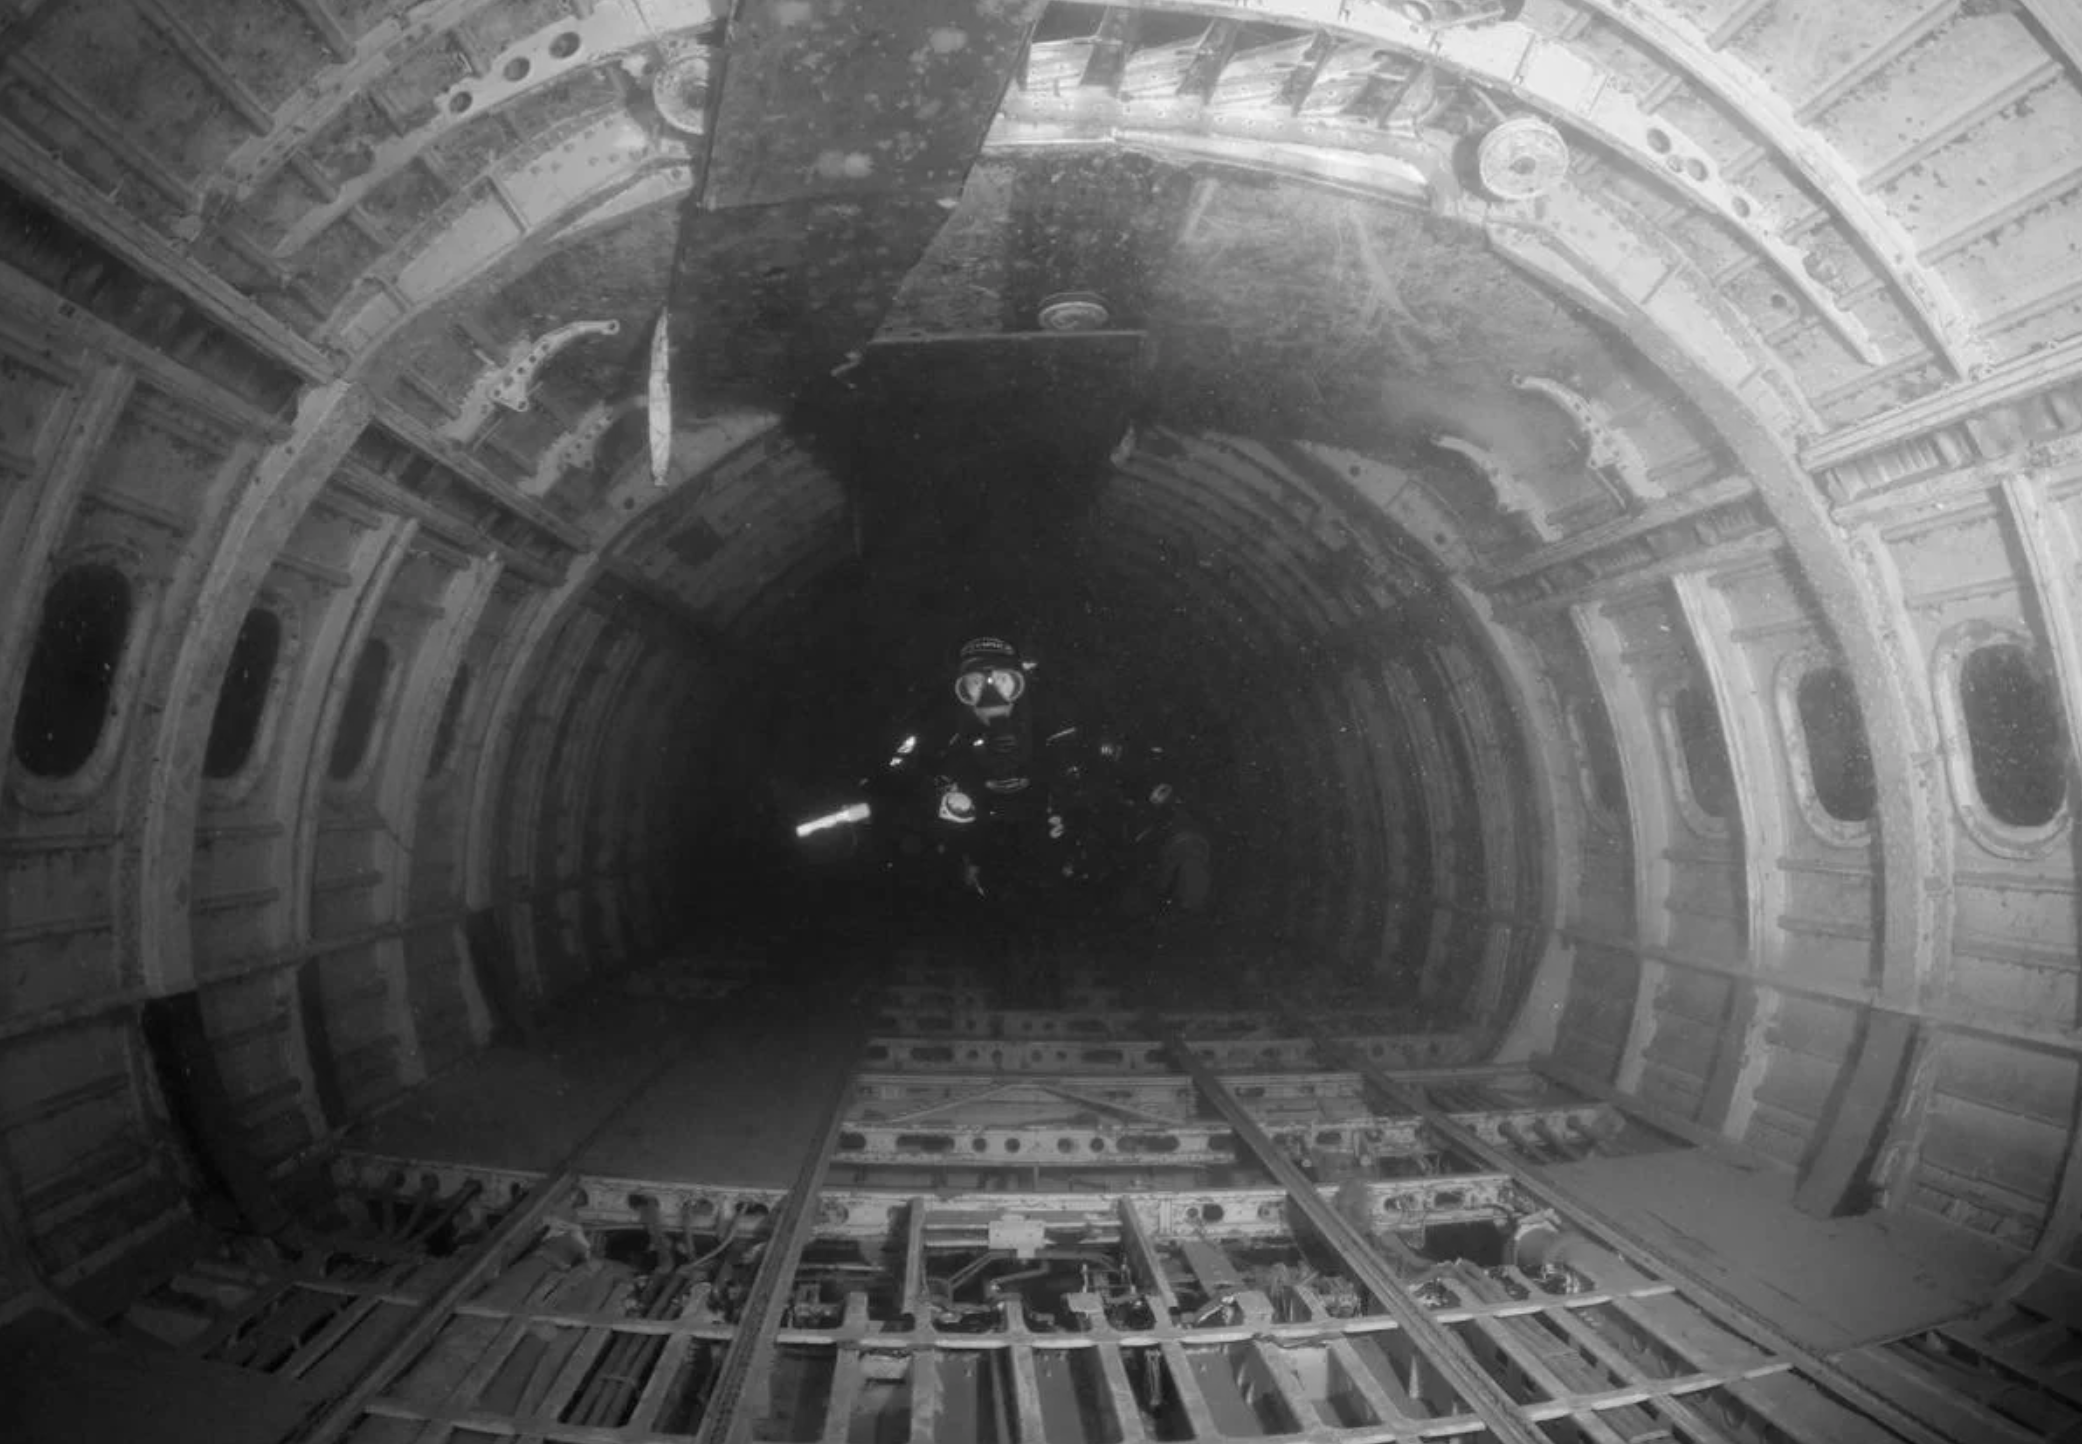 A diver swims through the inside of a plane full of water